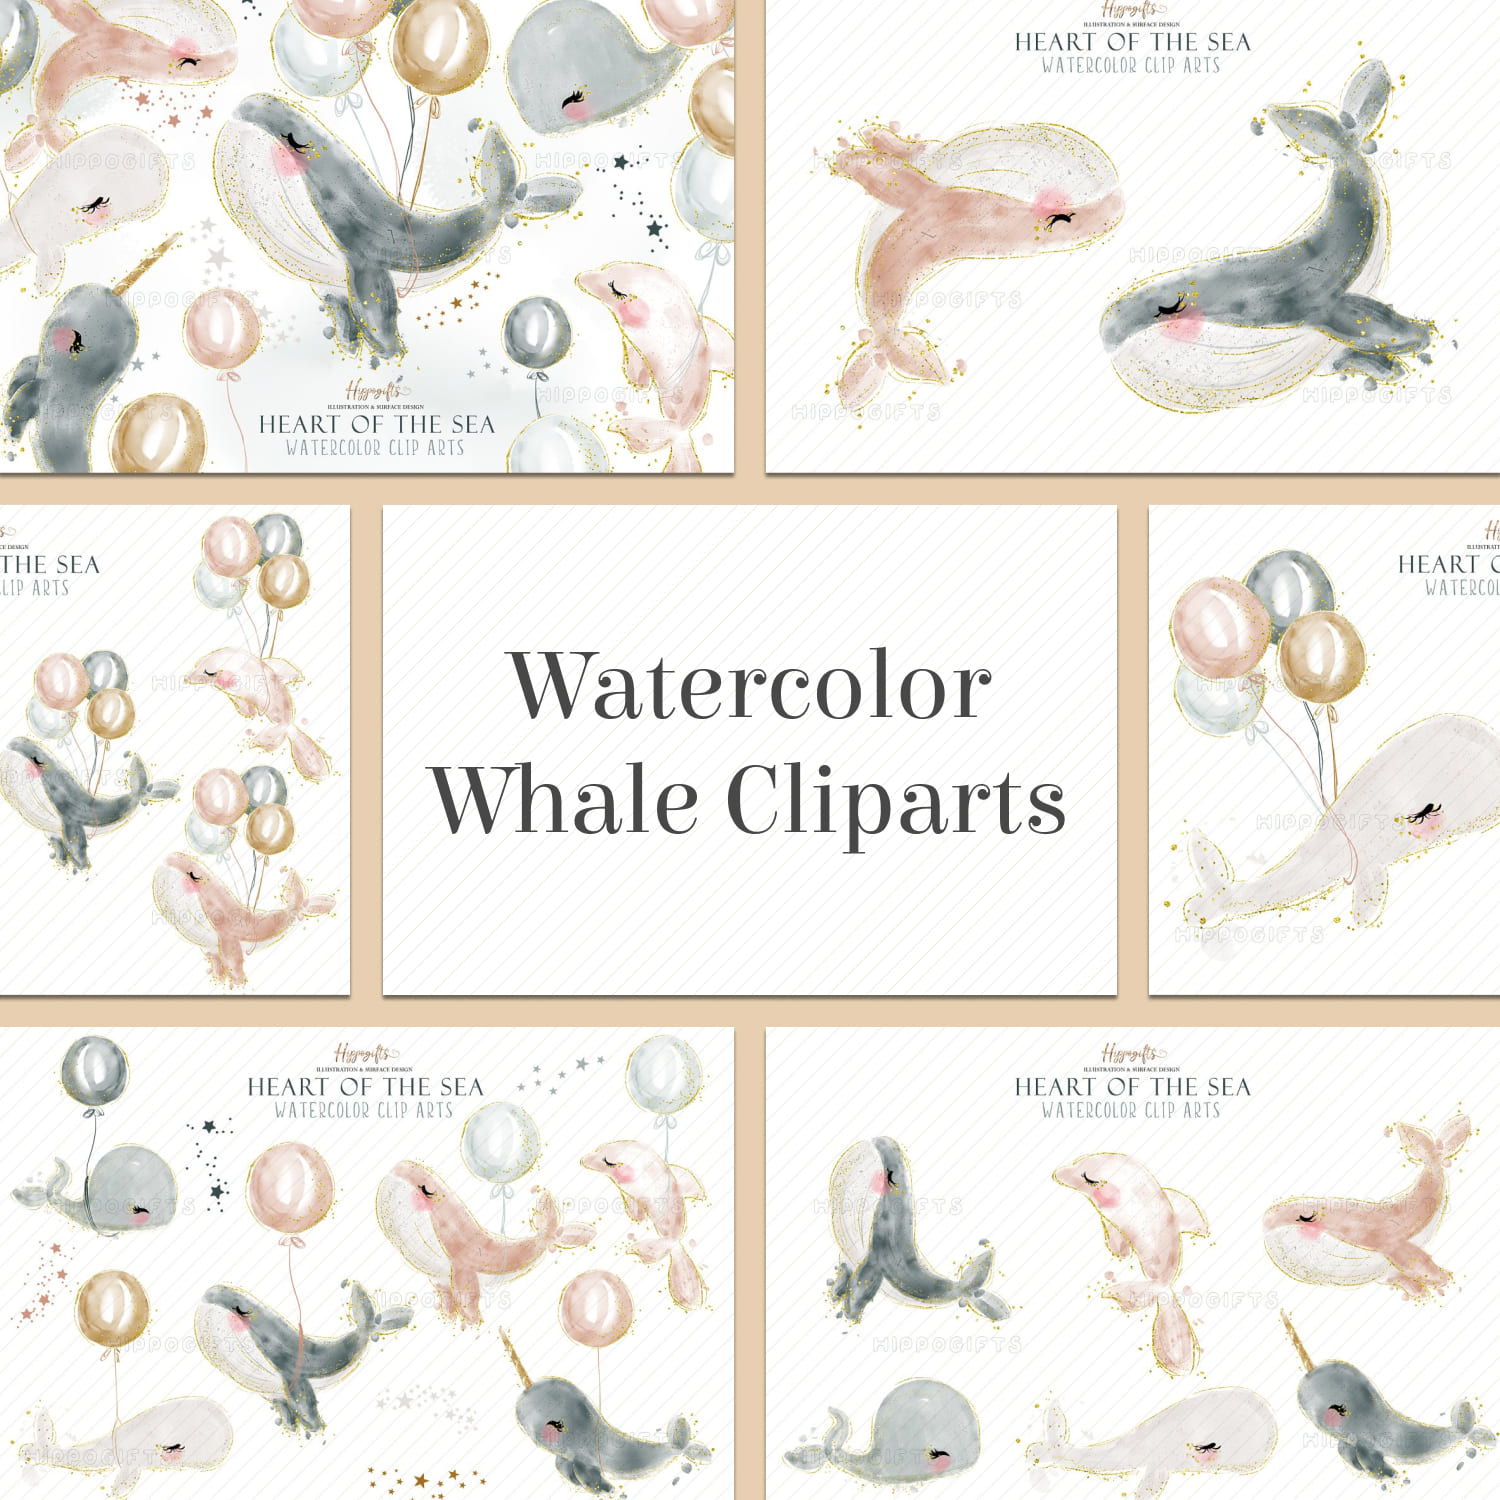 Watercolor Whale Cliparts Set cover image.